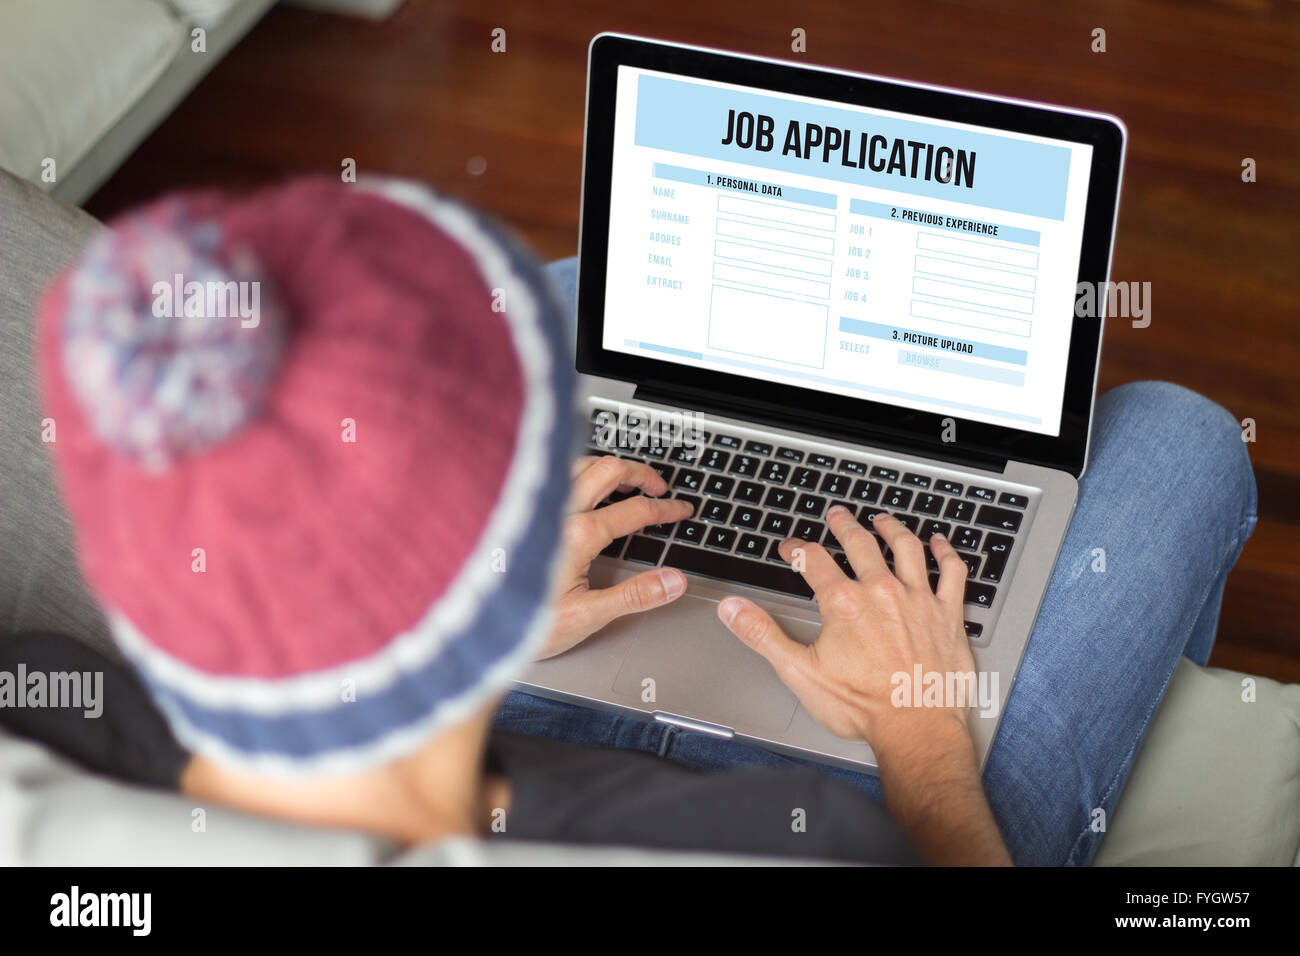 Applicant filling up online job application. All screen graphics are made up. Stock Photo